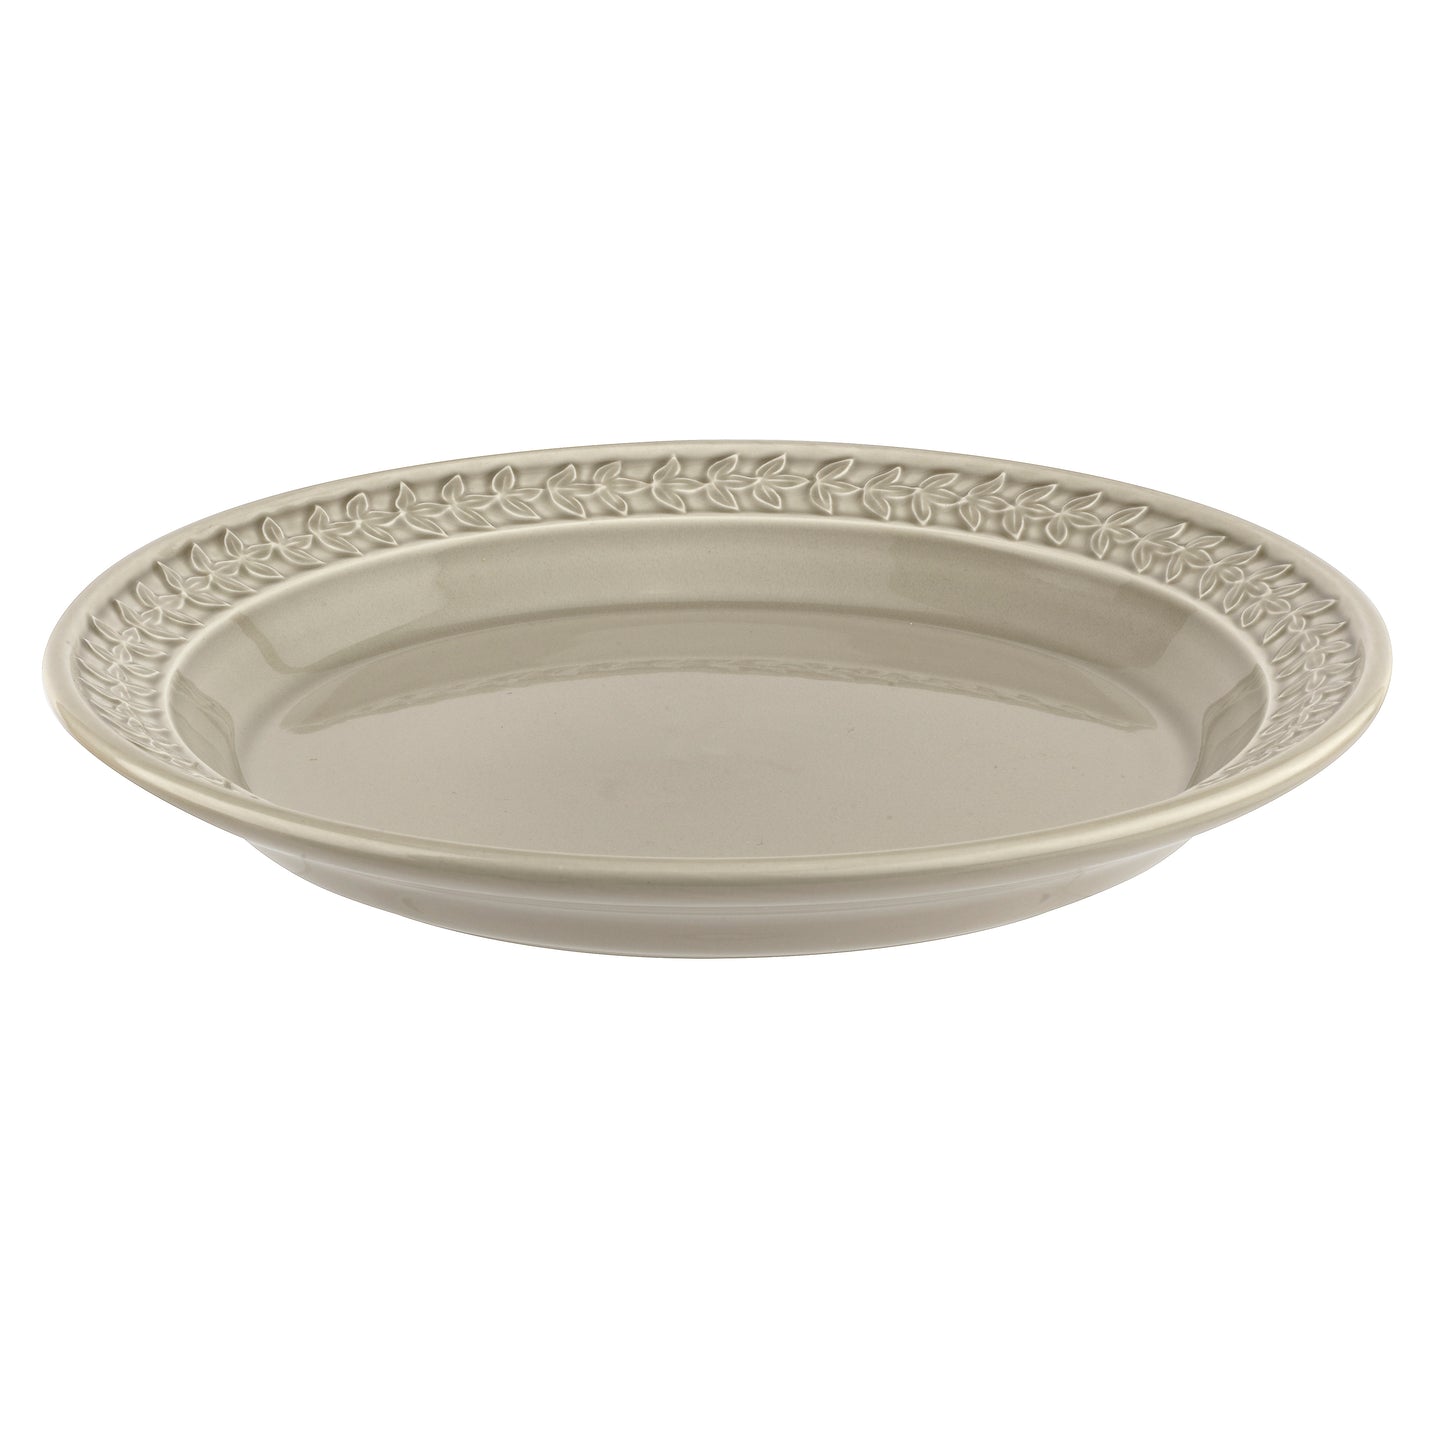 Side plate - Stone set of 2